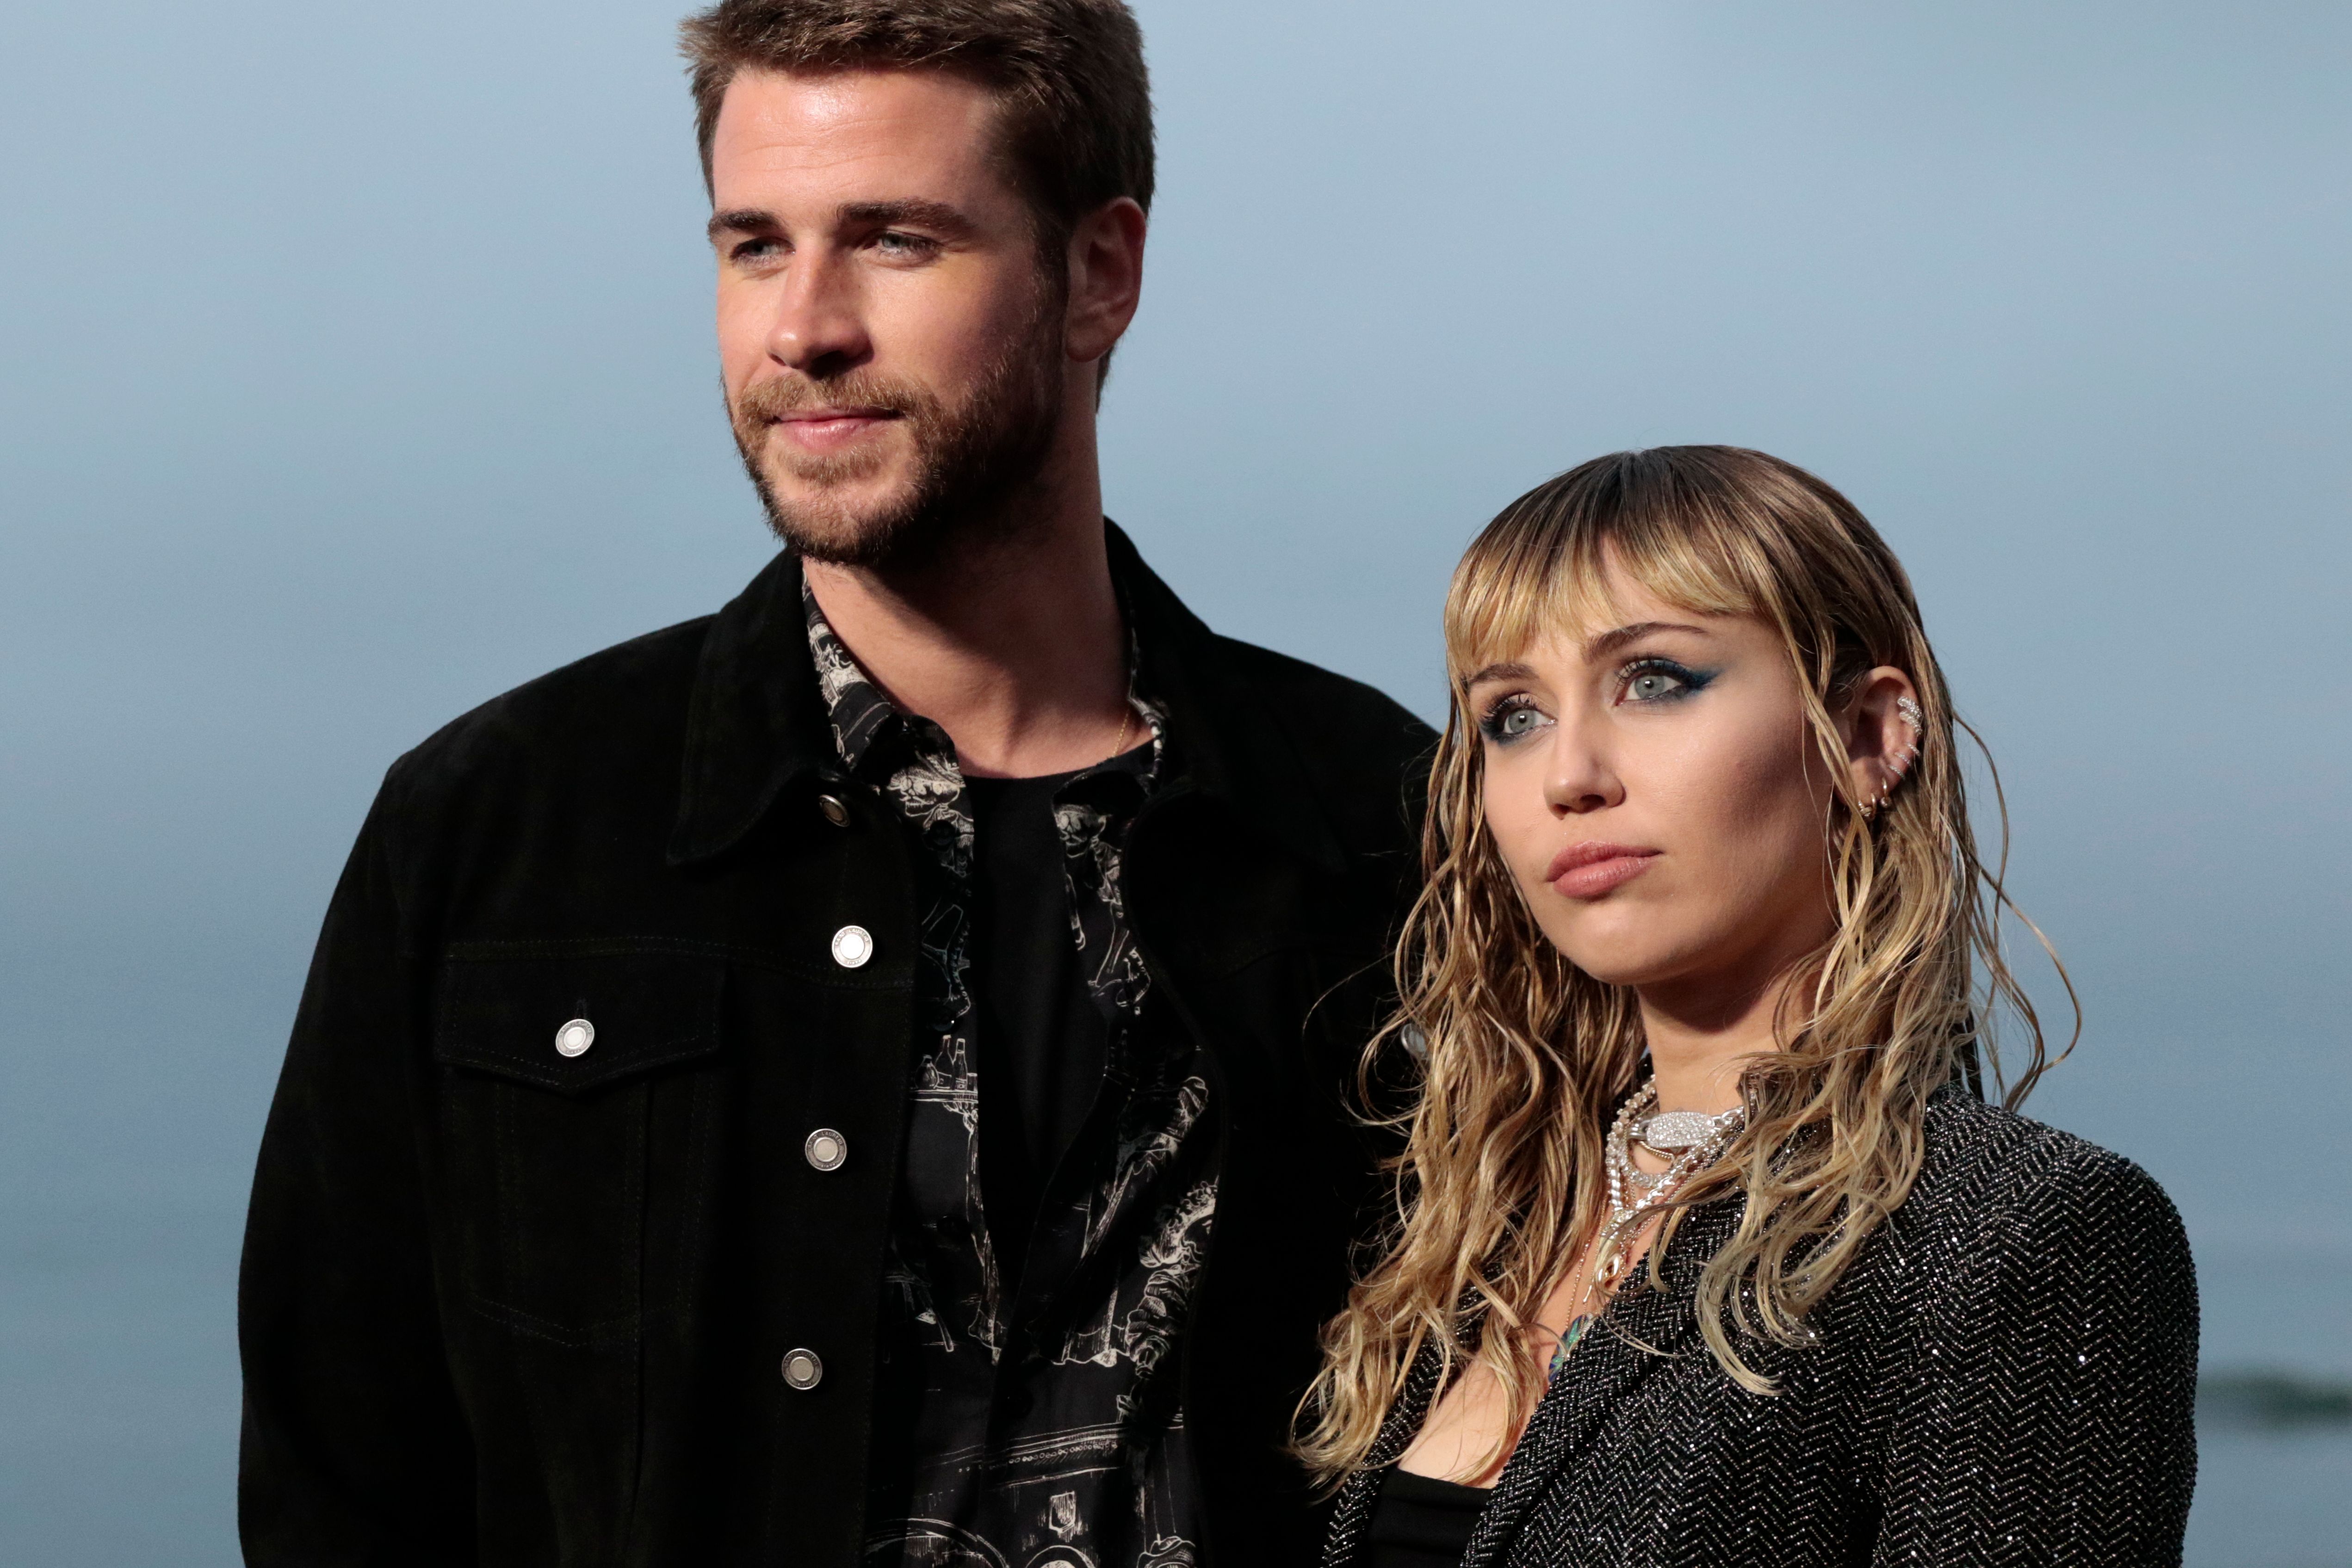 Miley Cyrus Questions if She Manifested Her Divorce From Liam Hemsworth With a Song